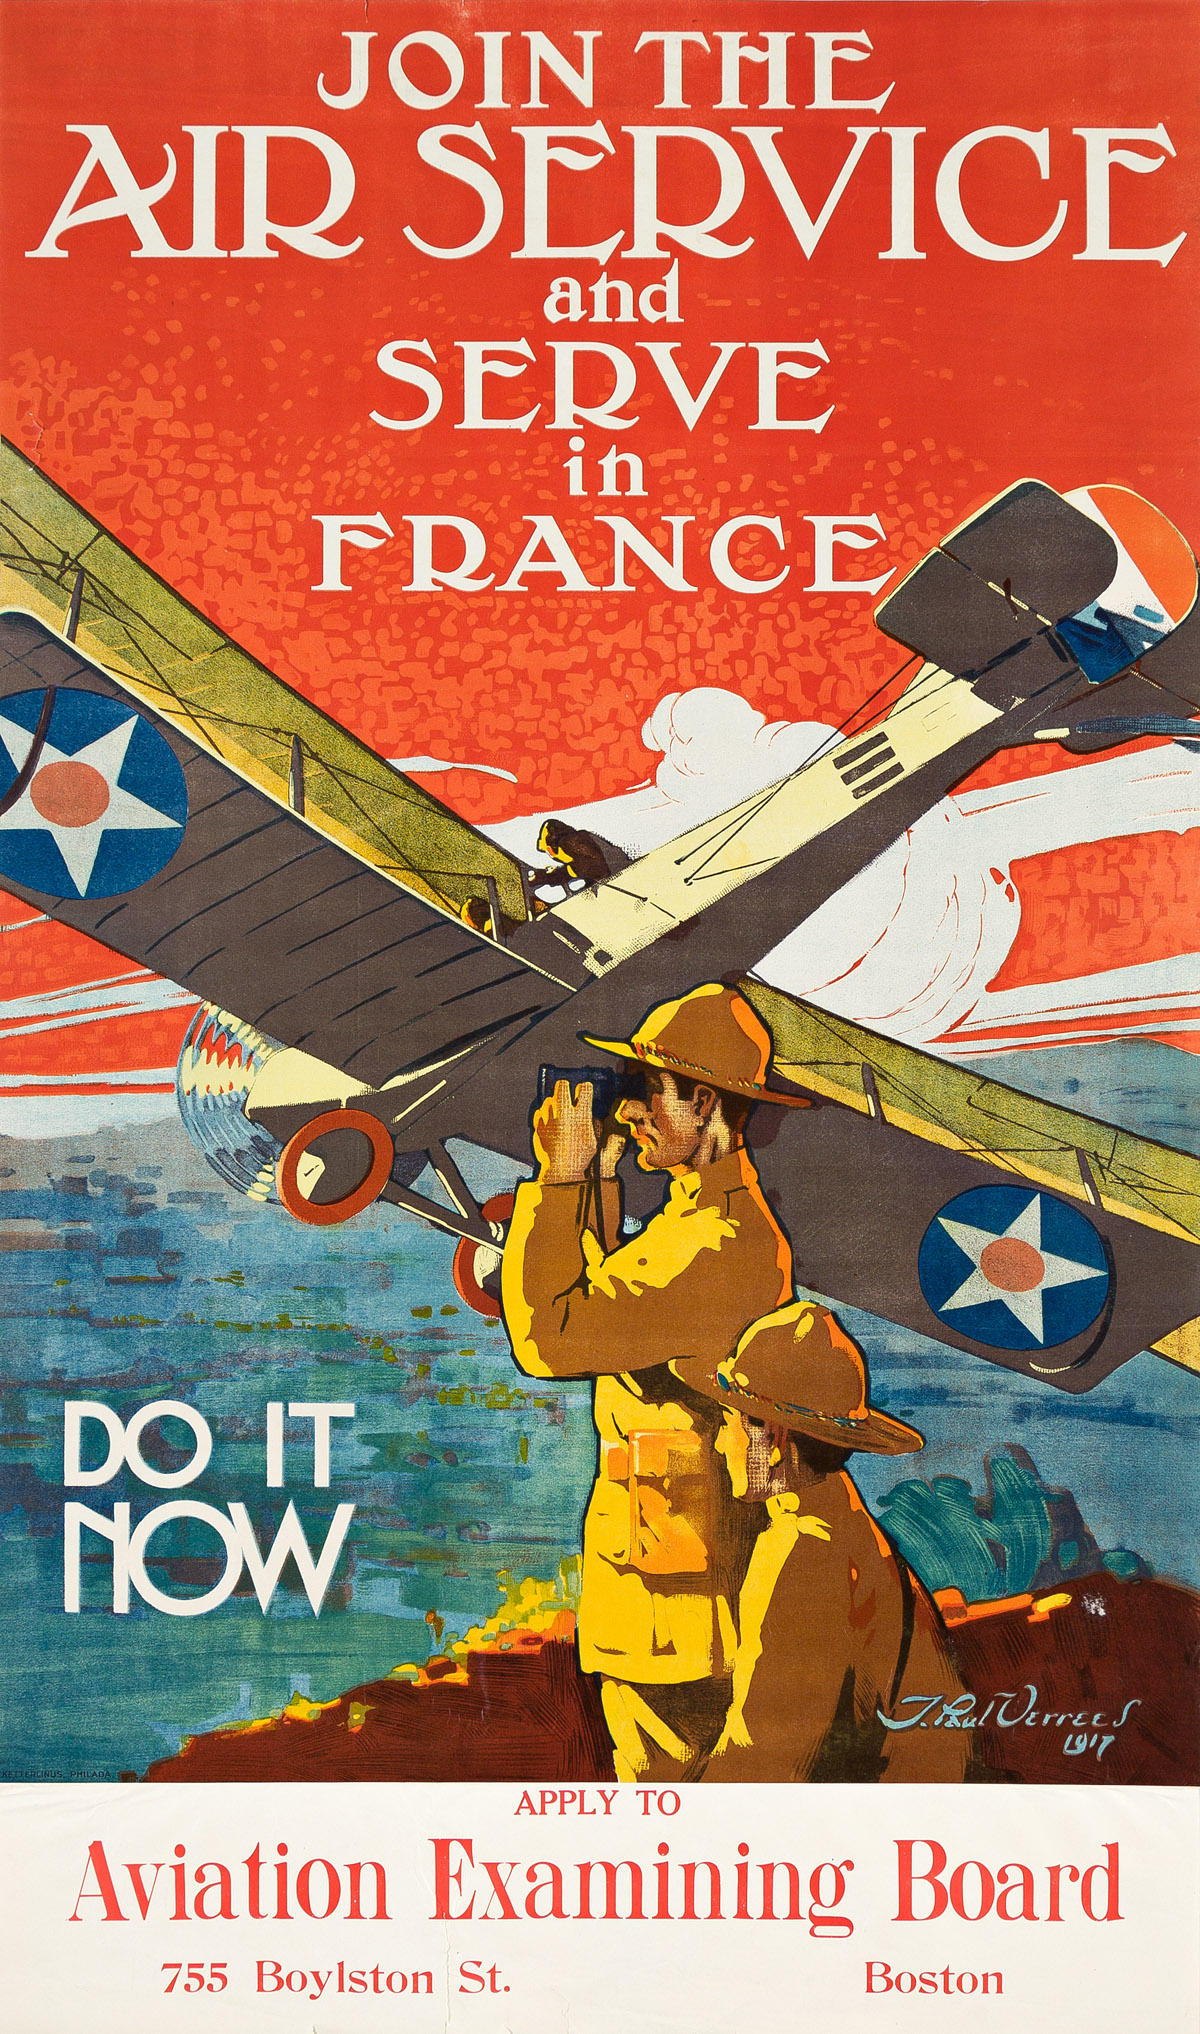 J. PAUL VERREES (1889-1942).  JOIN THE AIR SERVICE AND SERVE IN FRANCE. 1917. 42½x24¾ inches, 108x63 cm. Ketterlinus, Philadelphia.